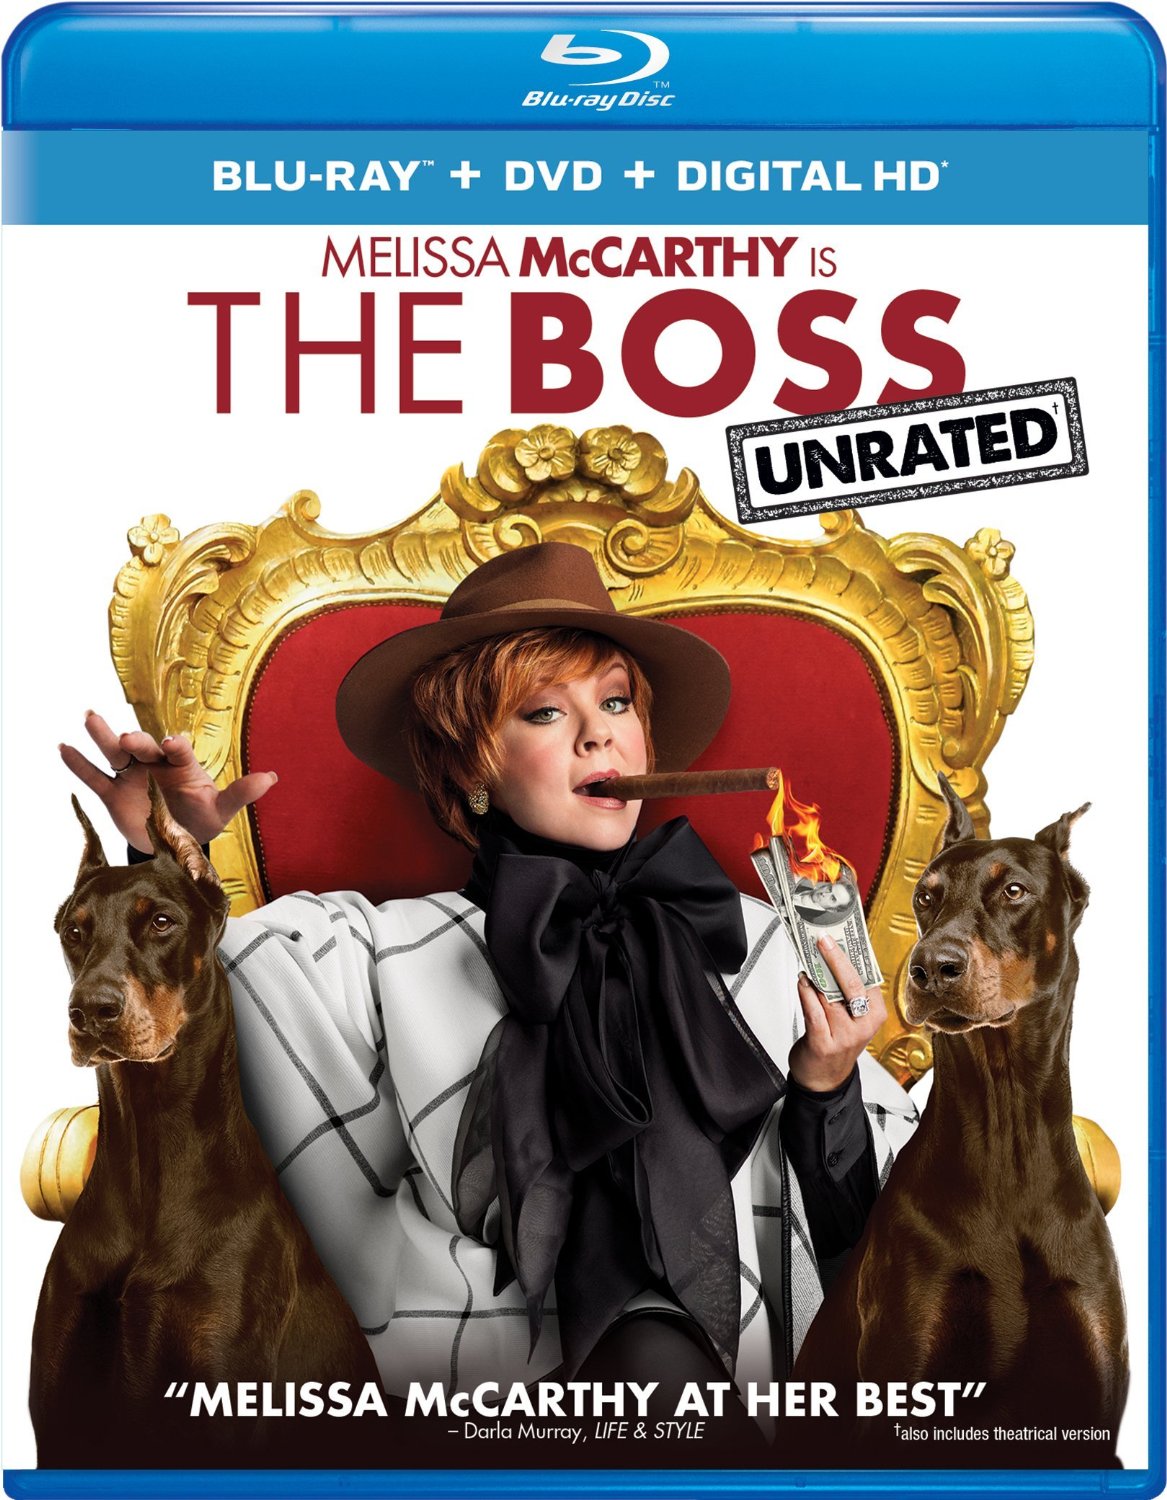 The Boss Blu-ray cover